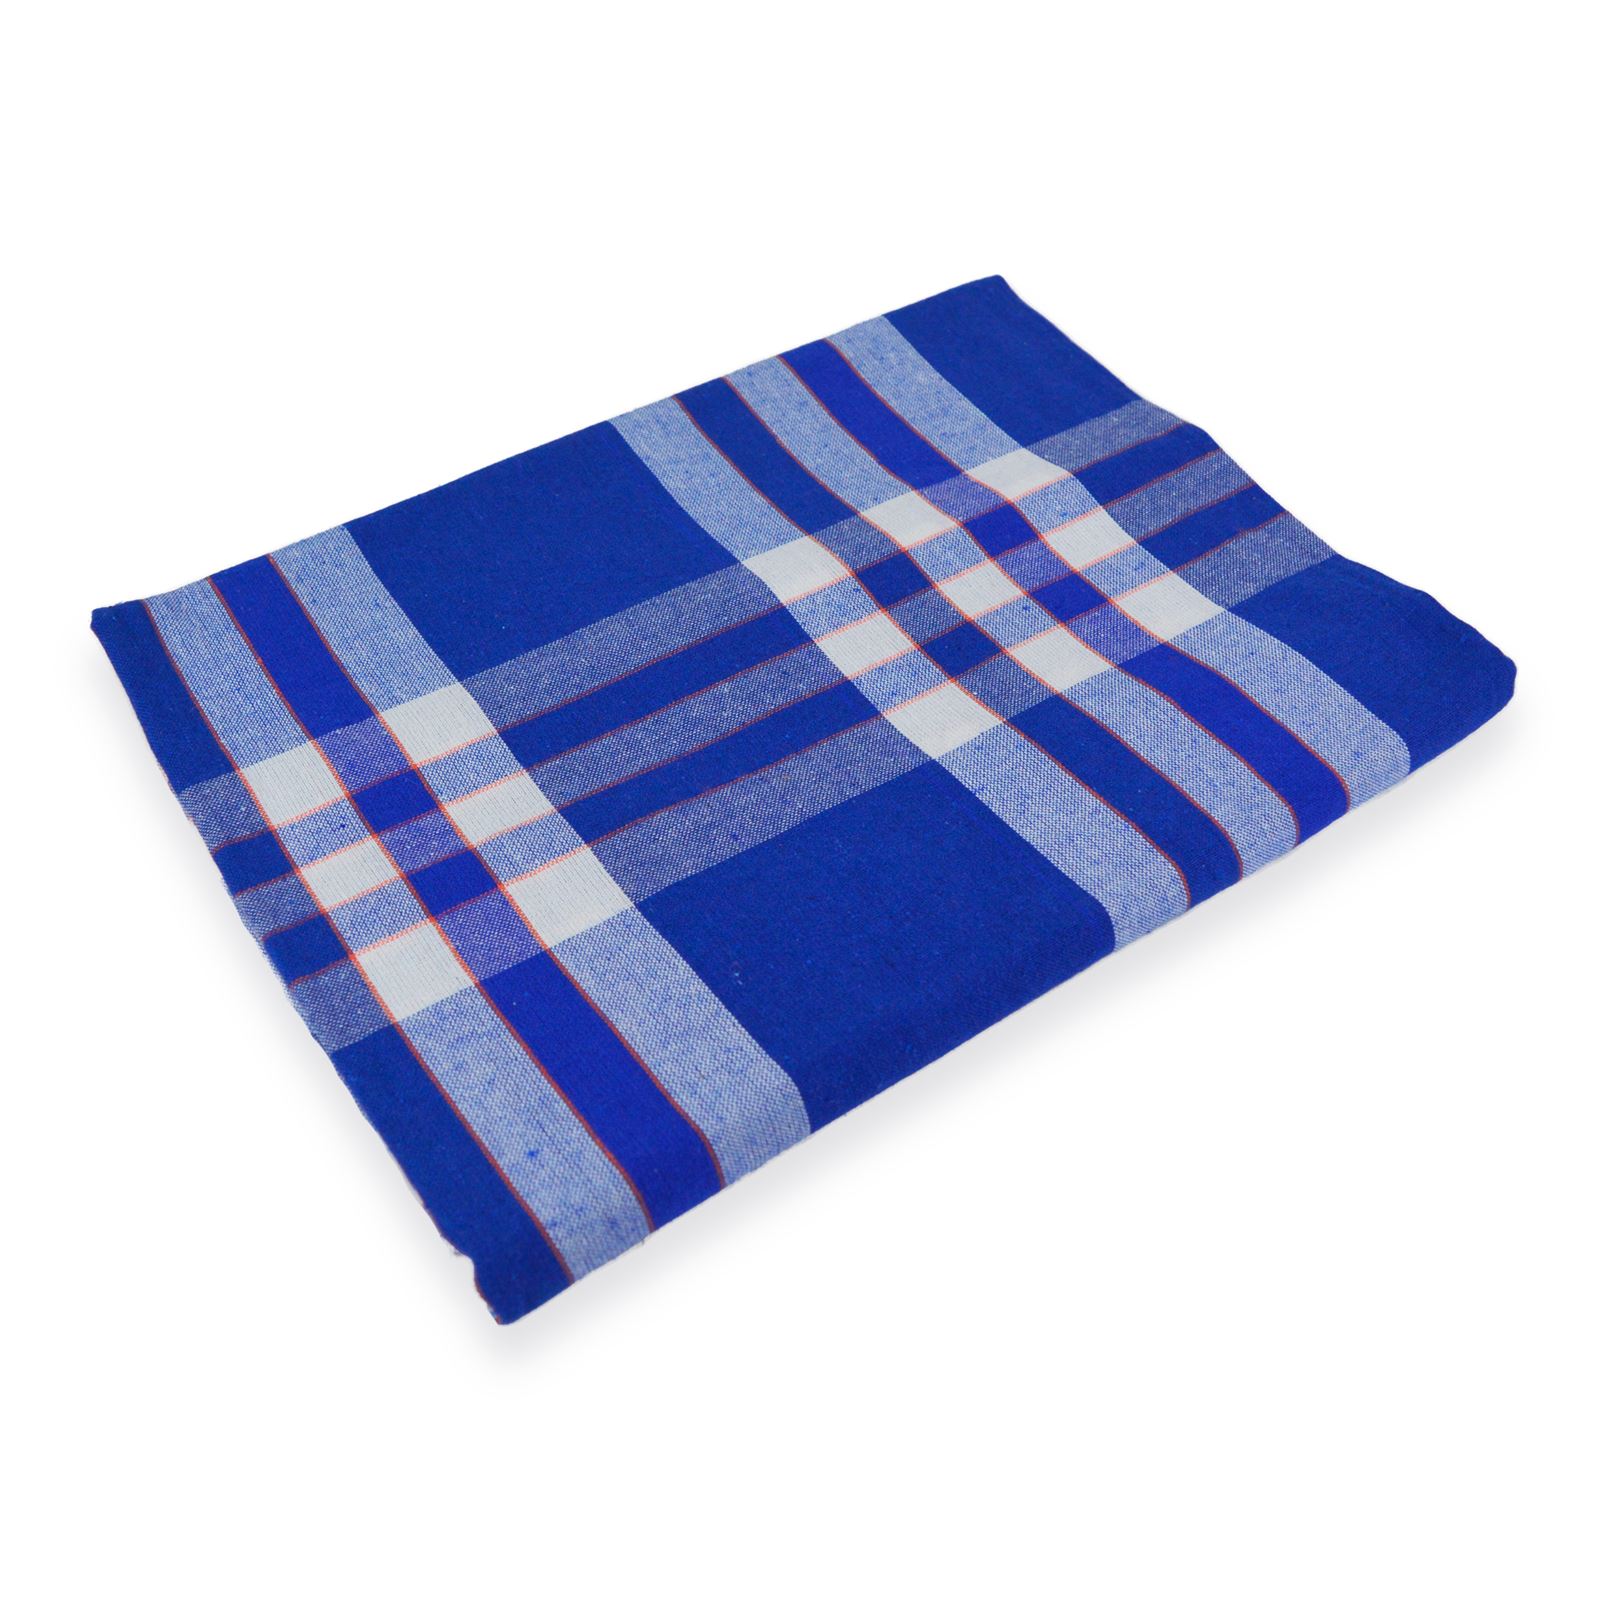 Blue Handloom Cotton Bed Sheets 54x80 (Inches) Checkered Style for Double, Single Beds